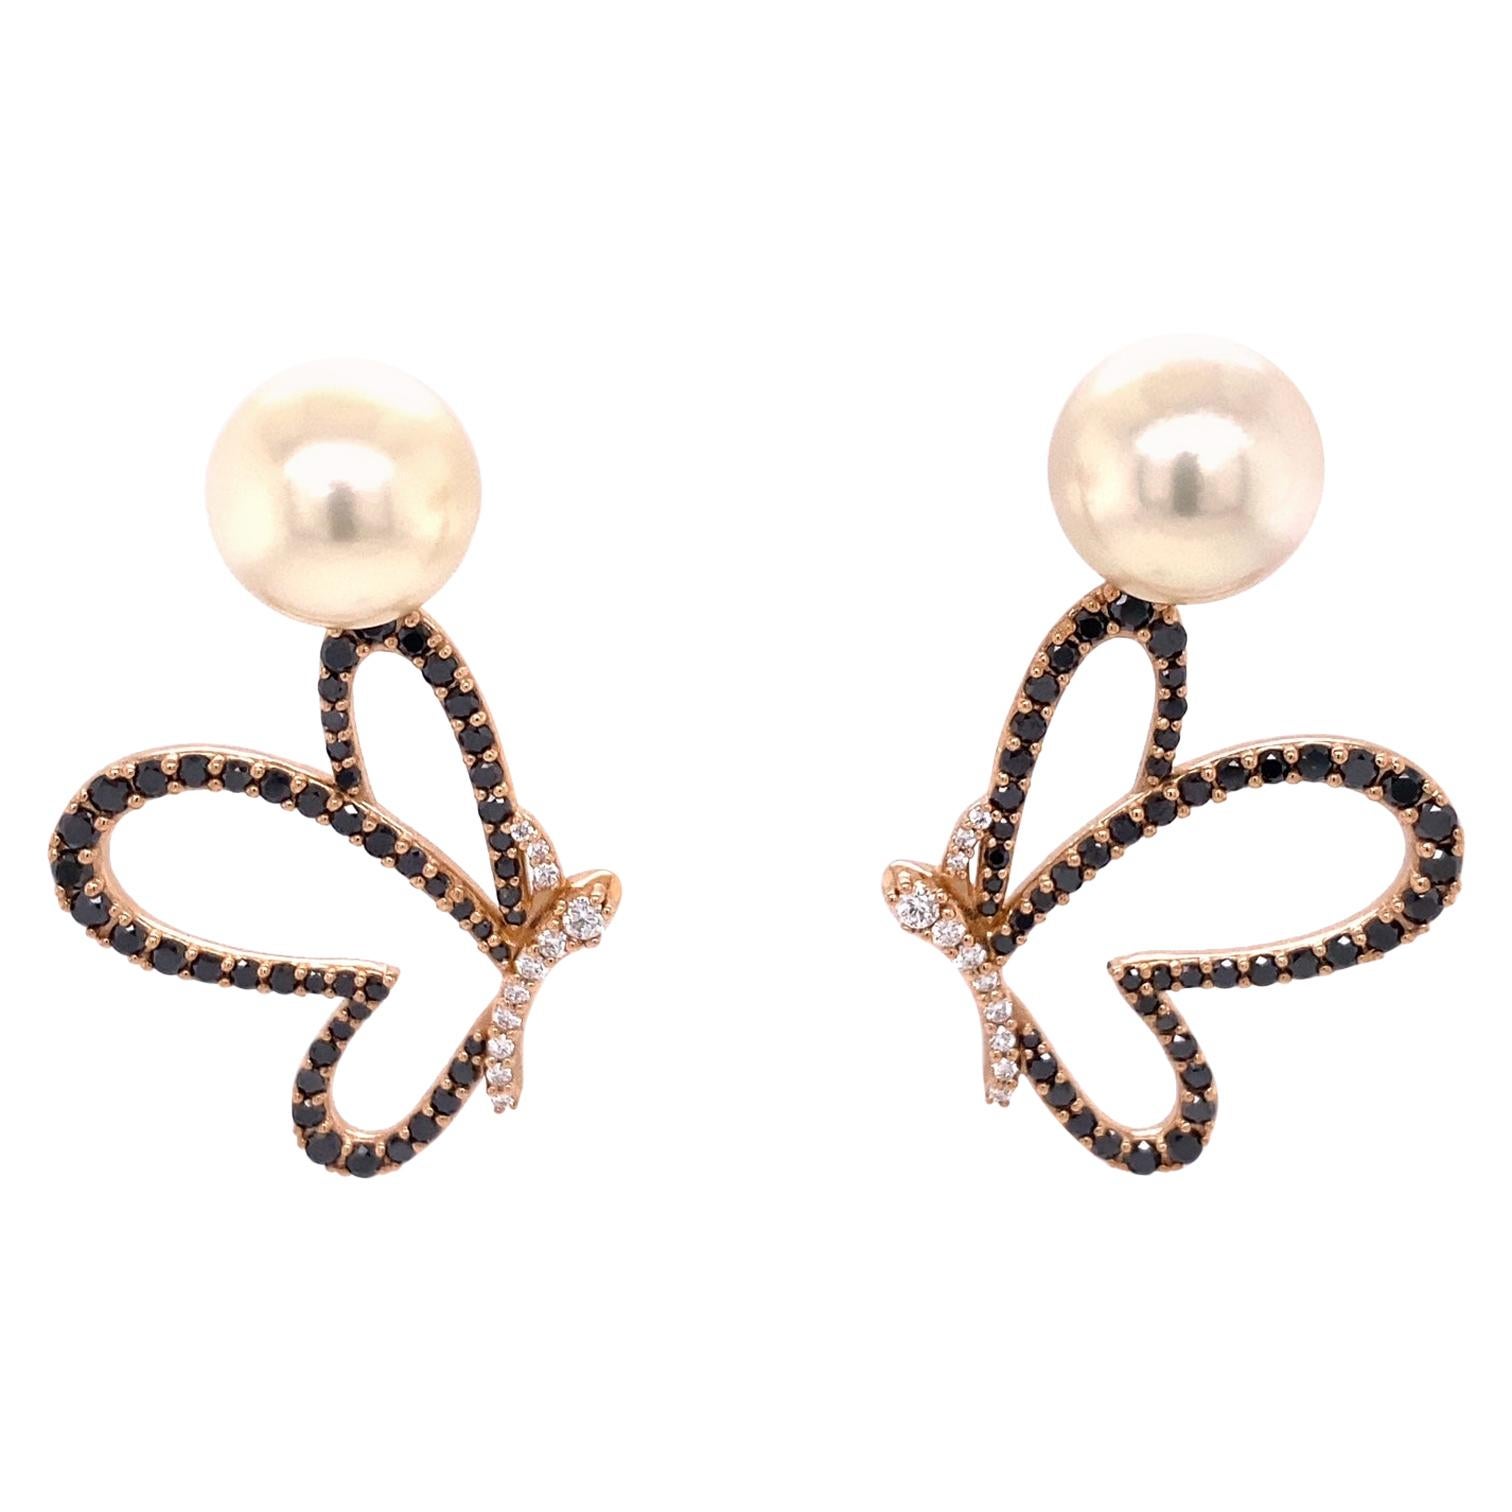 White South Sea Pearl Studs with Black and White Diamond Butterfly Jackets